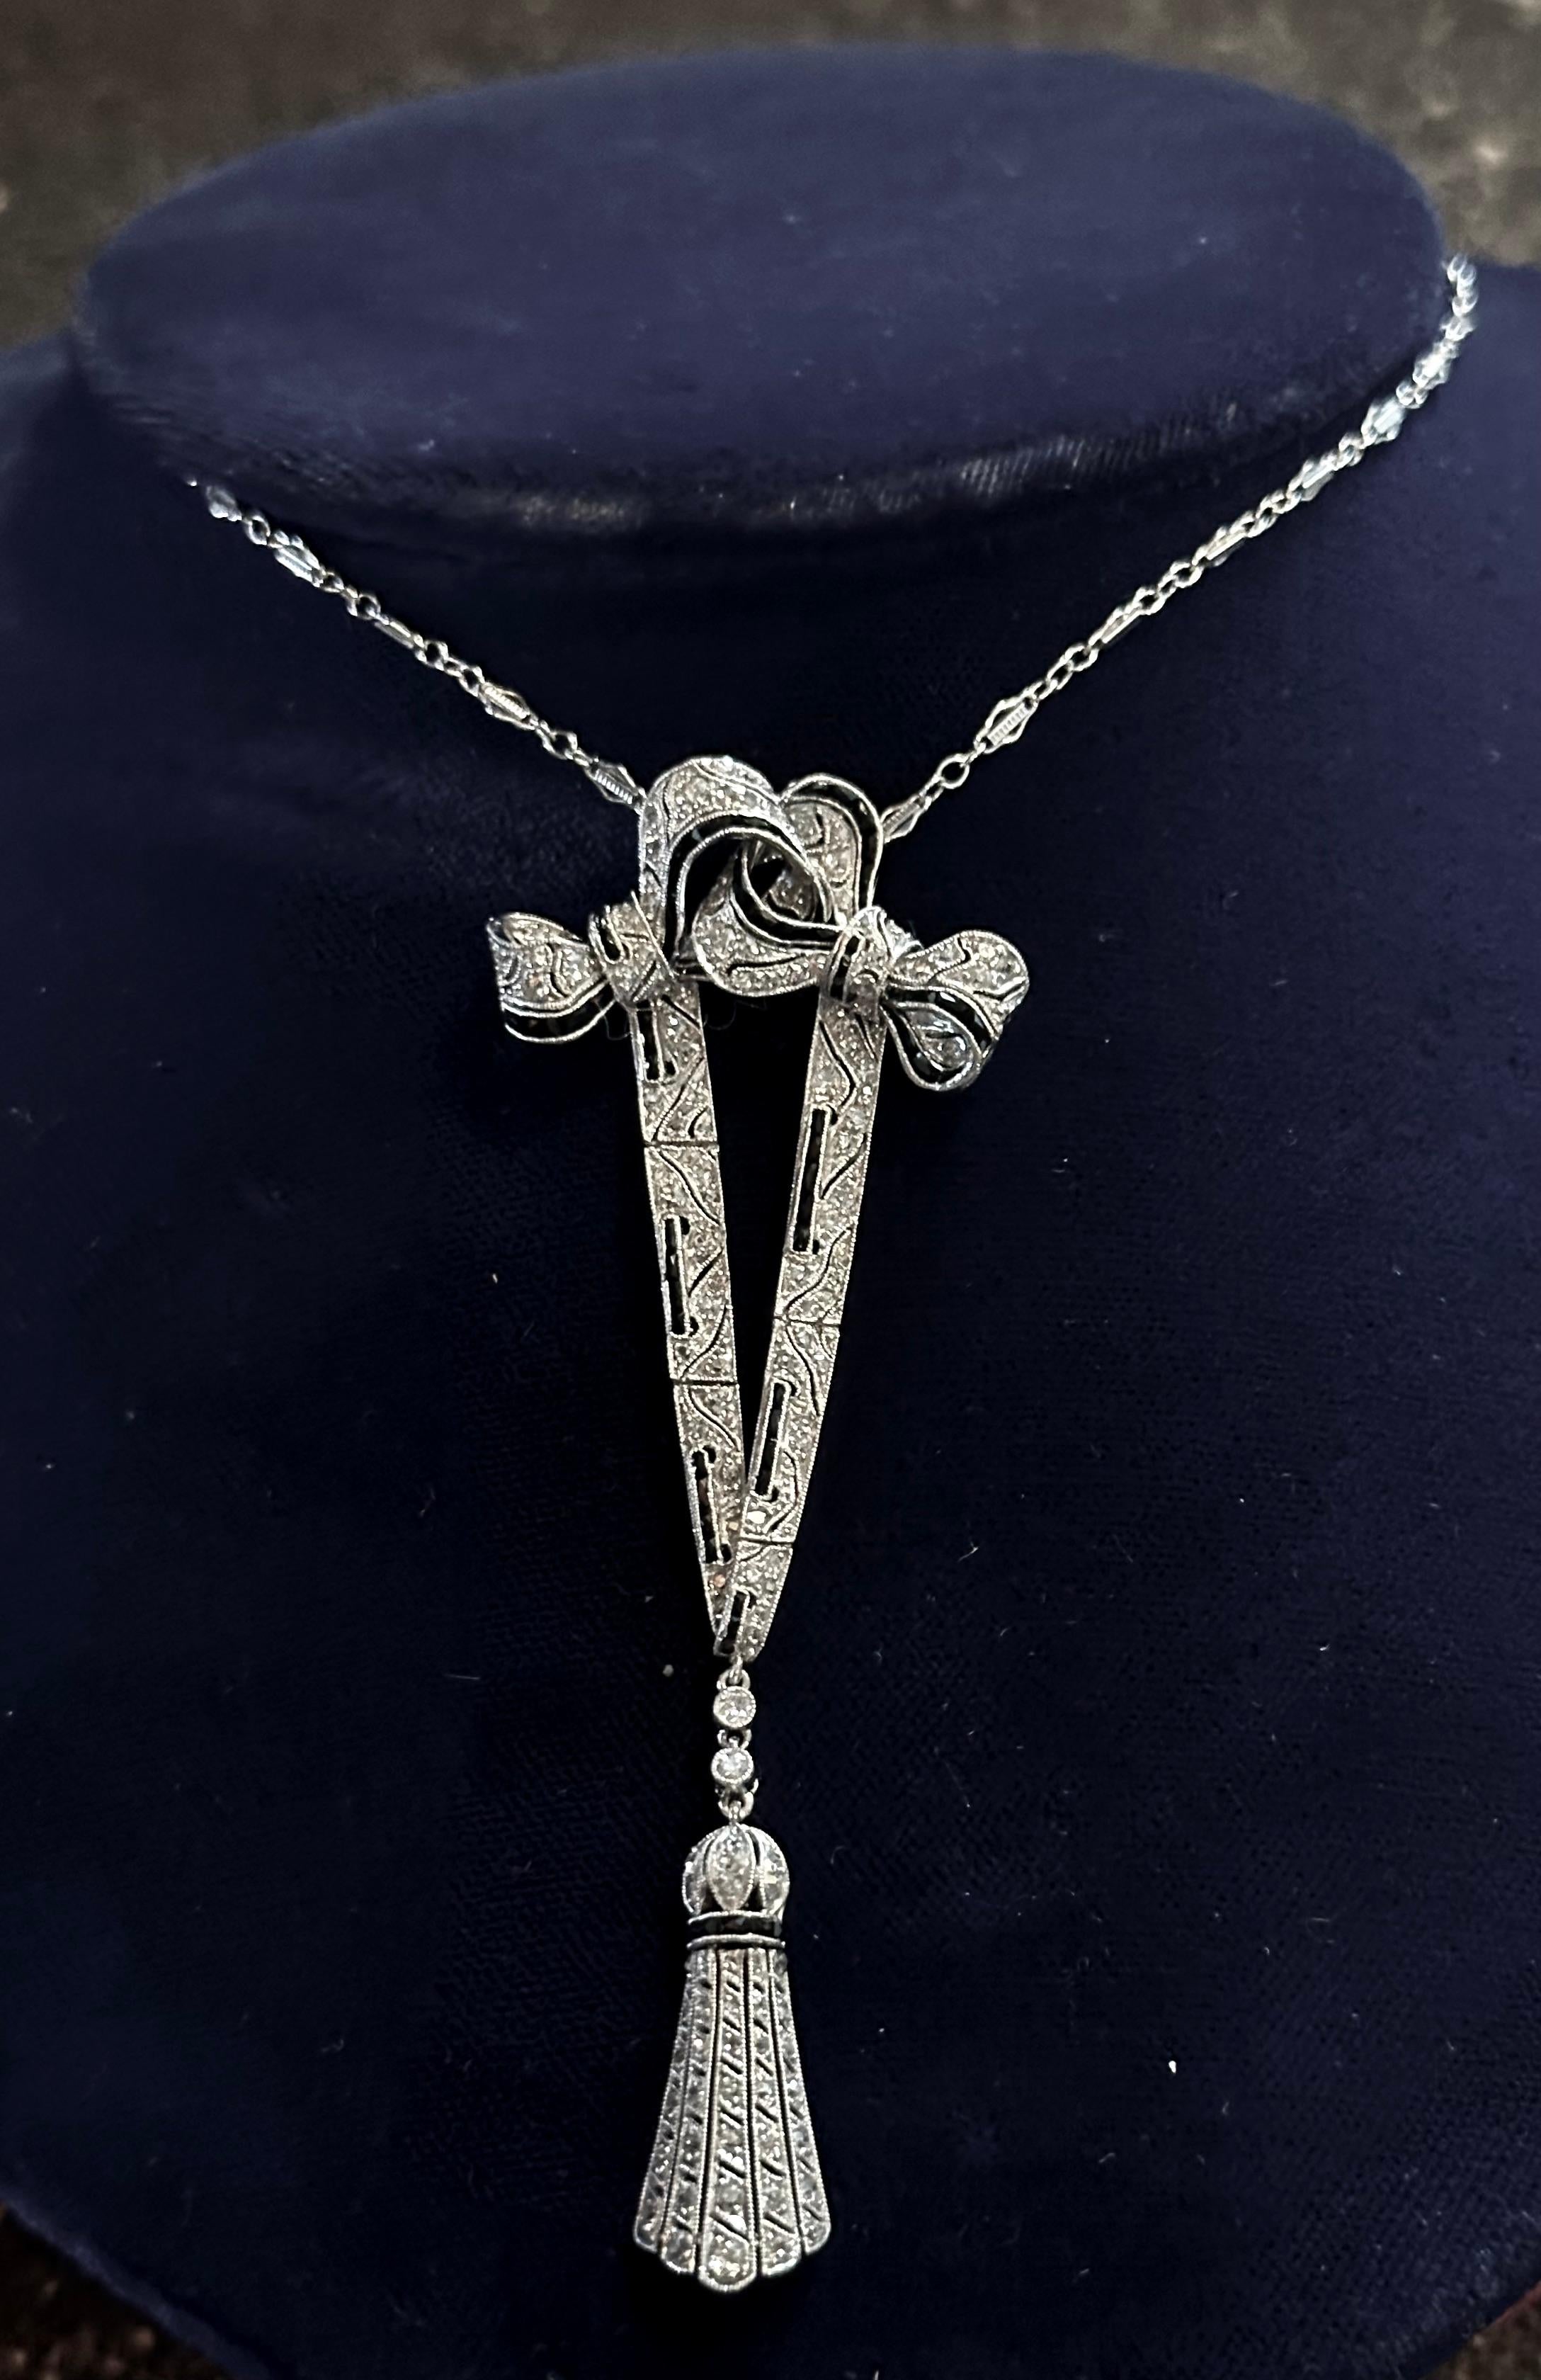 This vintage stunning Edwardian platinum & diamond lavalier necklace dates from the early 20th century. The hand crafted pendant is both beautiful & alluring. It is embellished with European cut diamonds accented with dark midnight blue sapphires.